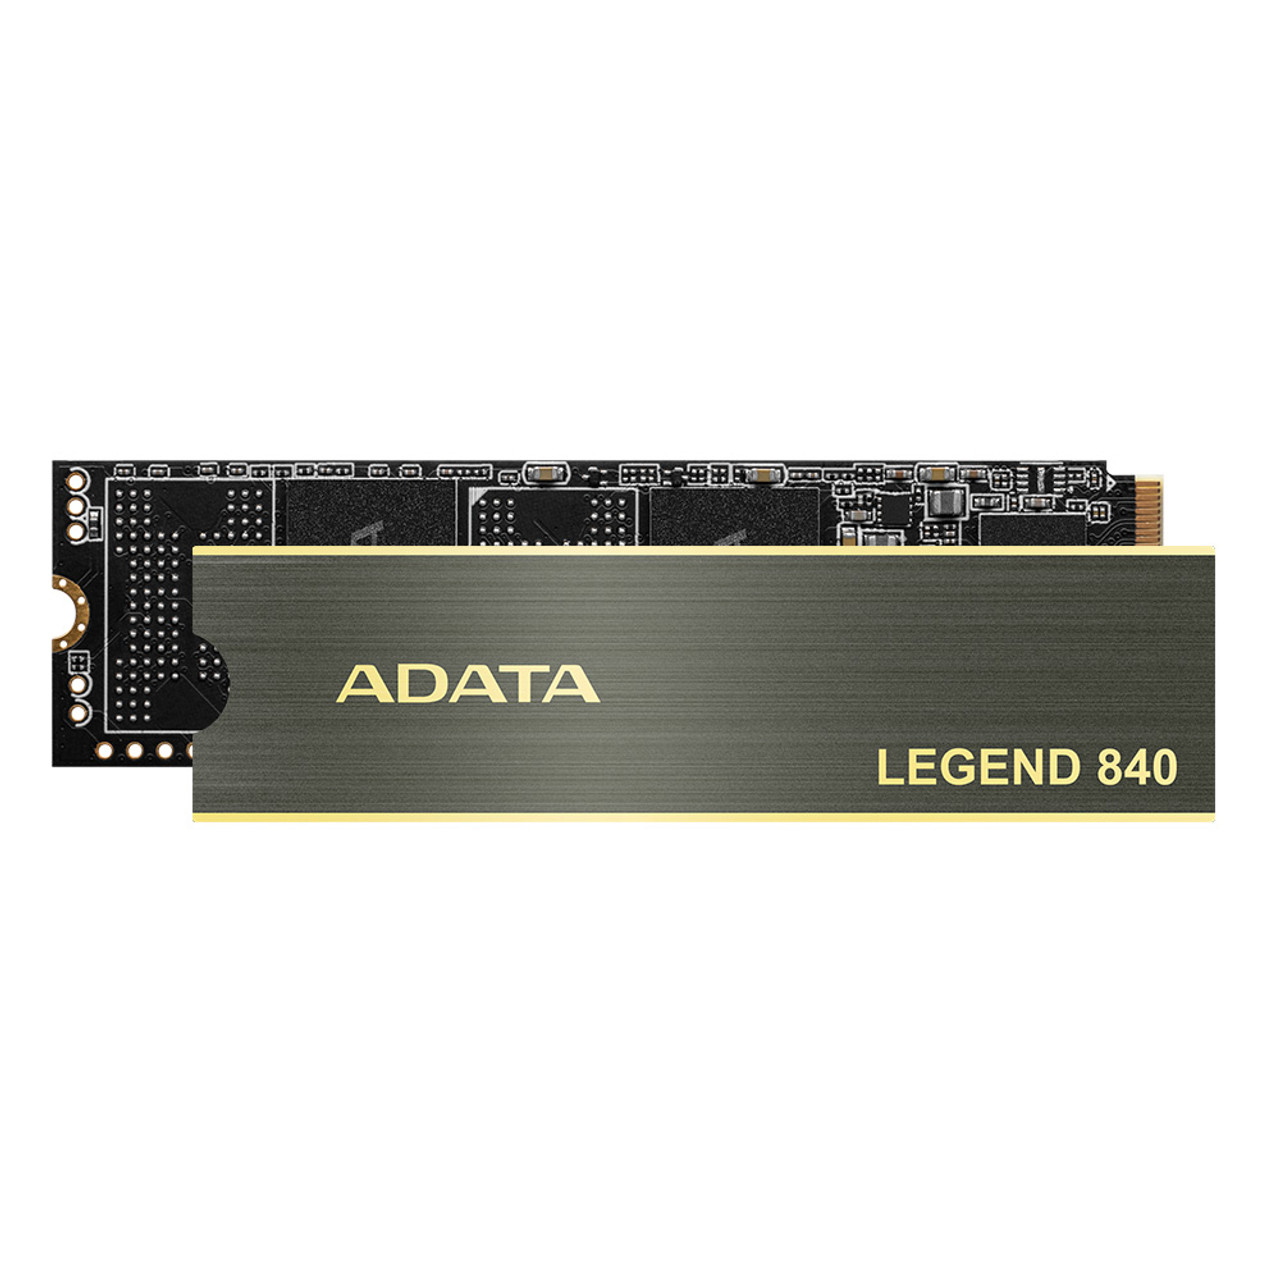 ADATA LEGEND 840 512GB M.2 2280 PCIe Gen4x4 Internal Solid State Drive |  PS5 Compatible - Innogrit IG5220 | Up to 5000 MBps - Grey/Gold SSD | 1PK -  ADATA